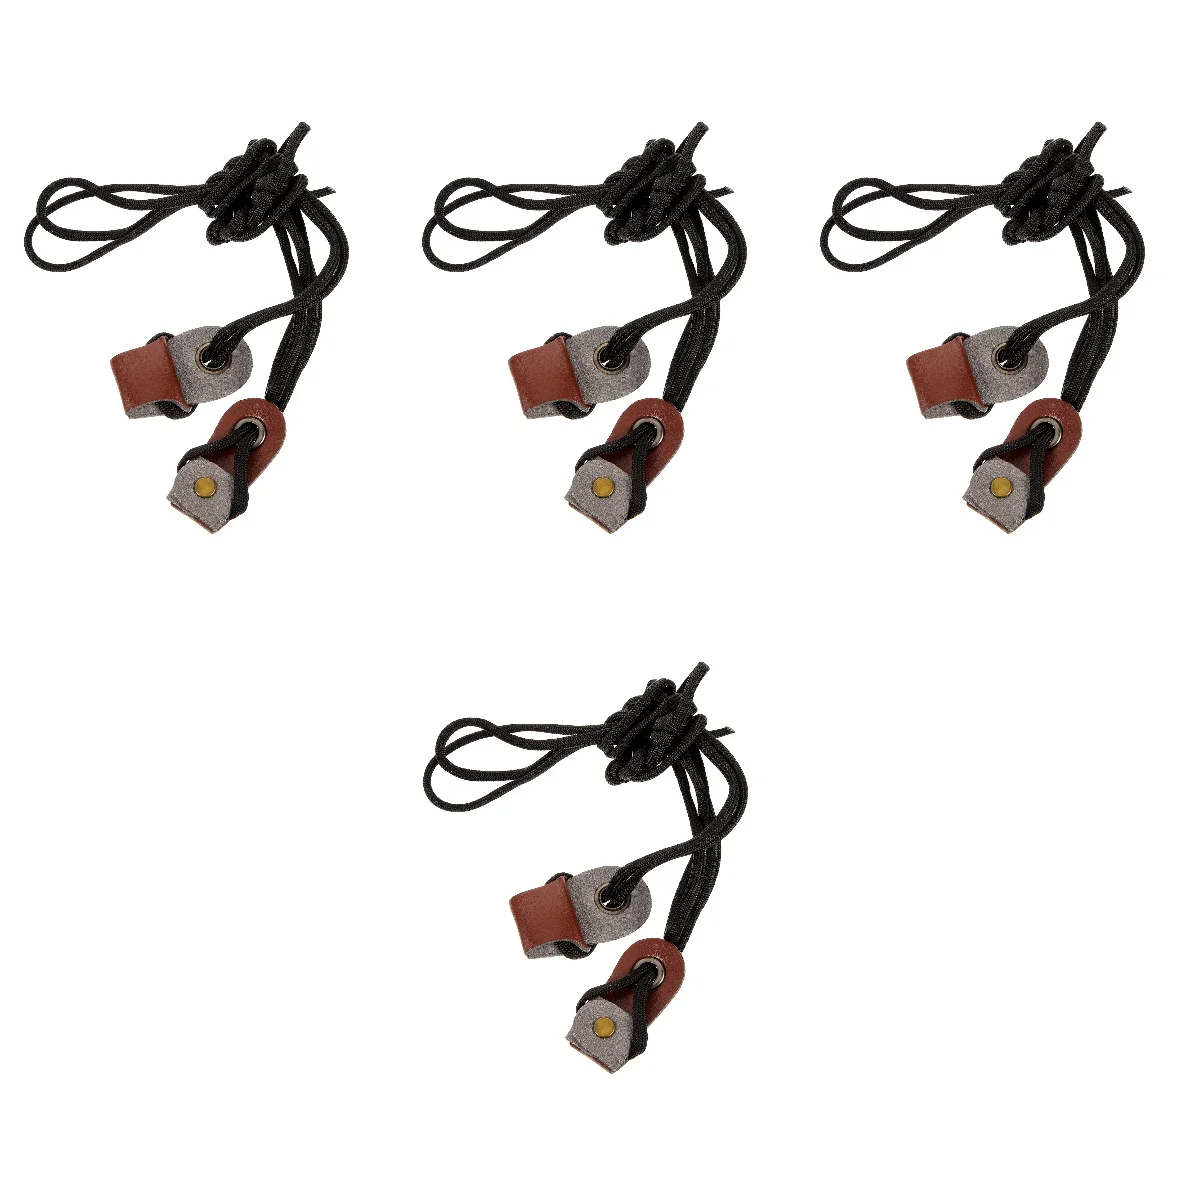 

4 Count Bowstring Holster Shooting Archery Accessory Recurve Pro Tools Installation Long Professional